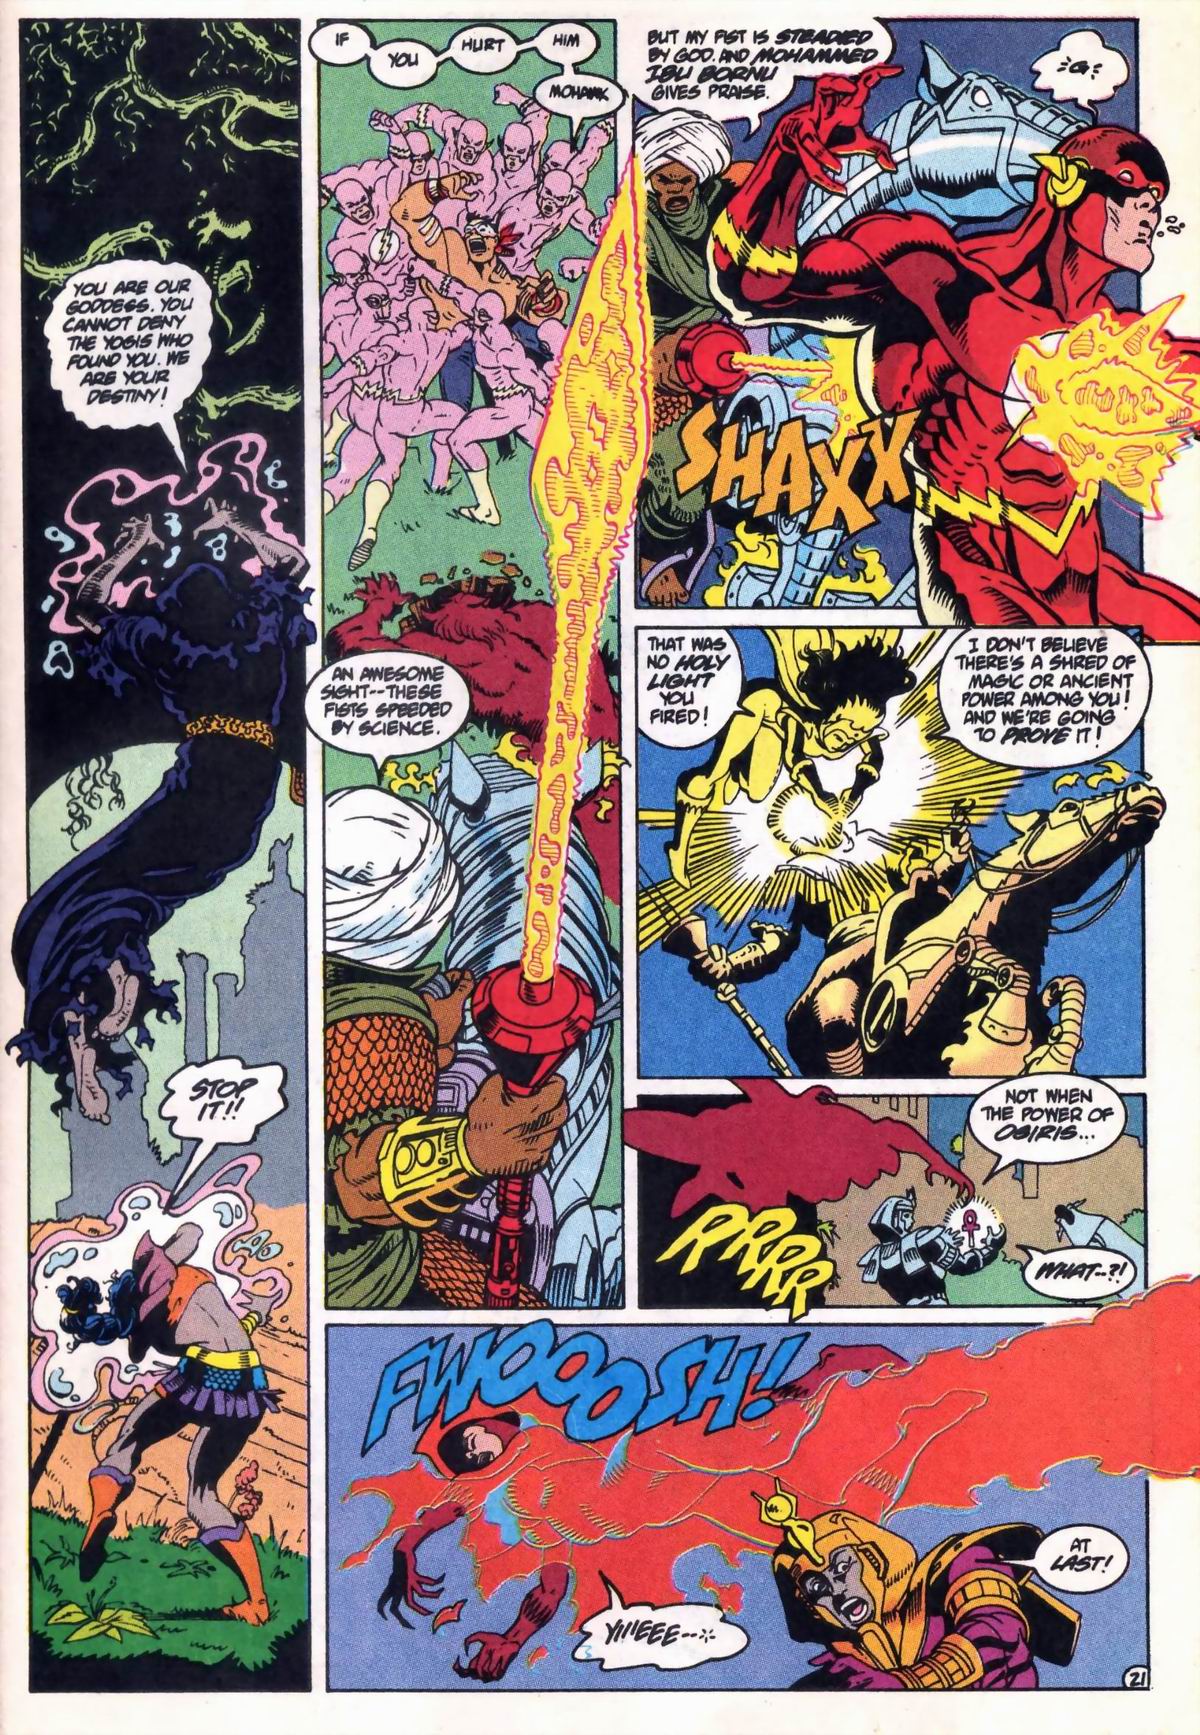 Justice League International (1993) 63 Page 23